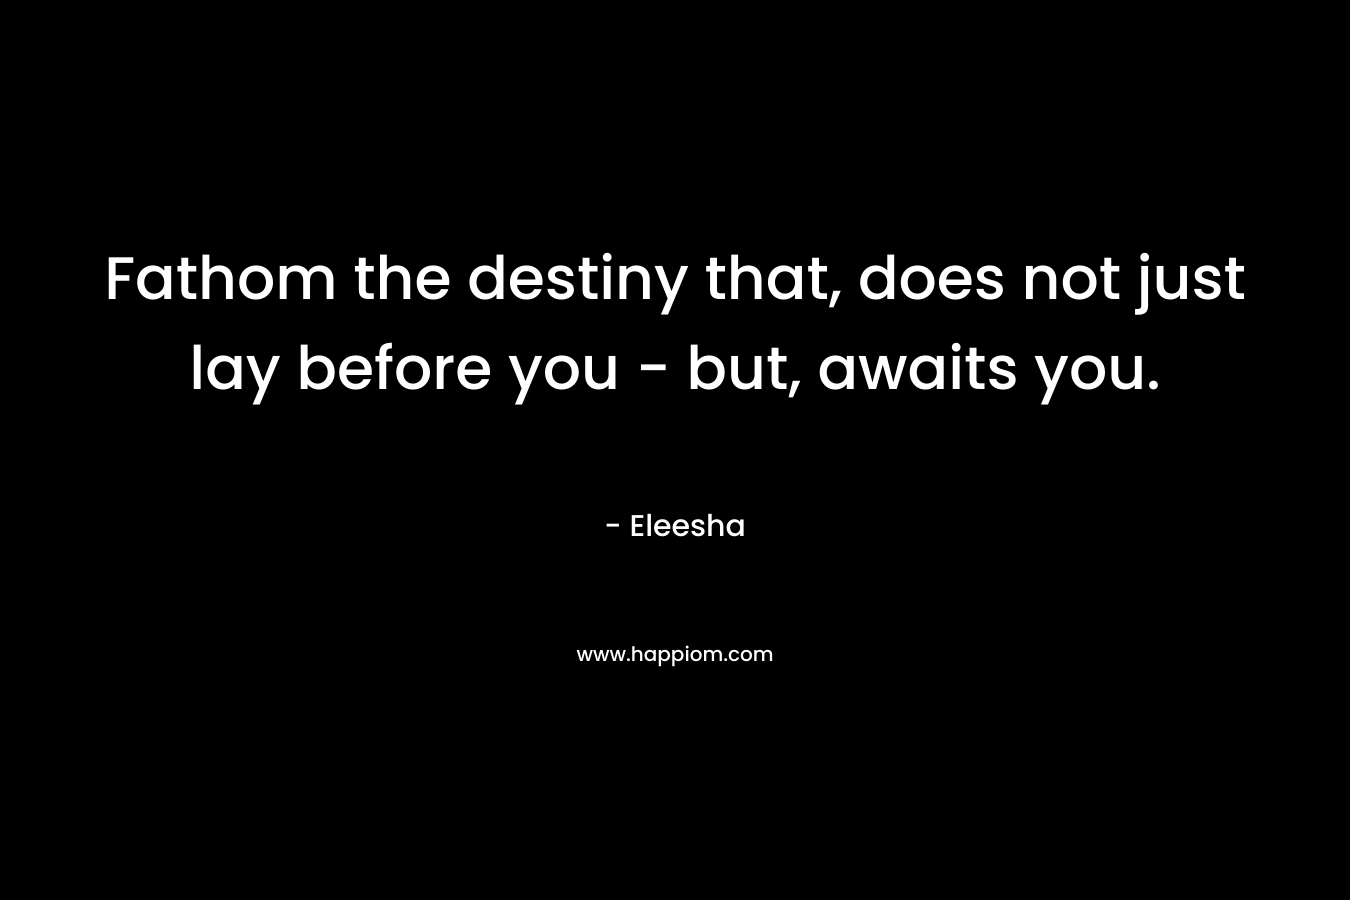 Fathom the destiny that, does not just lay before you – but, awaits you. – Eleesha